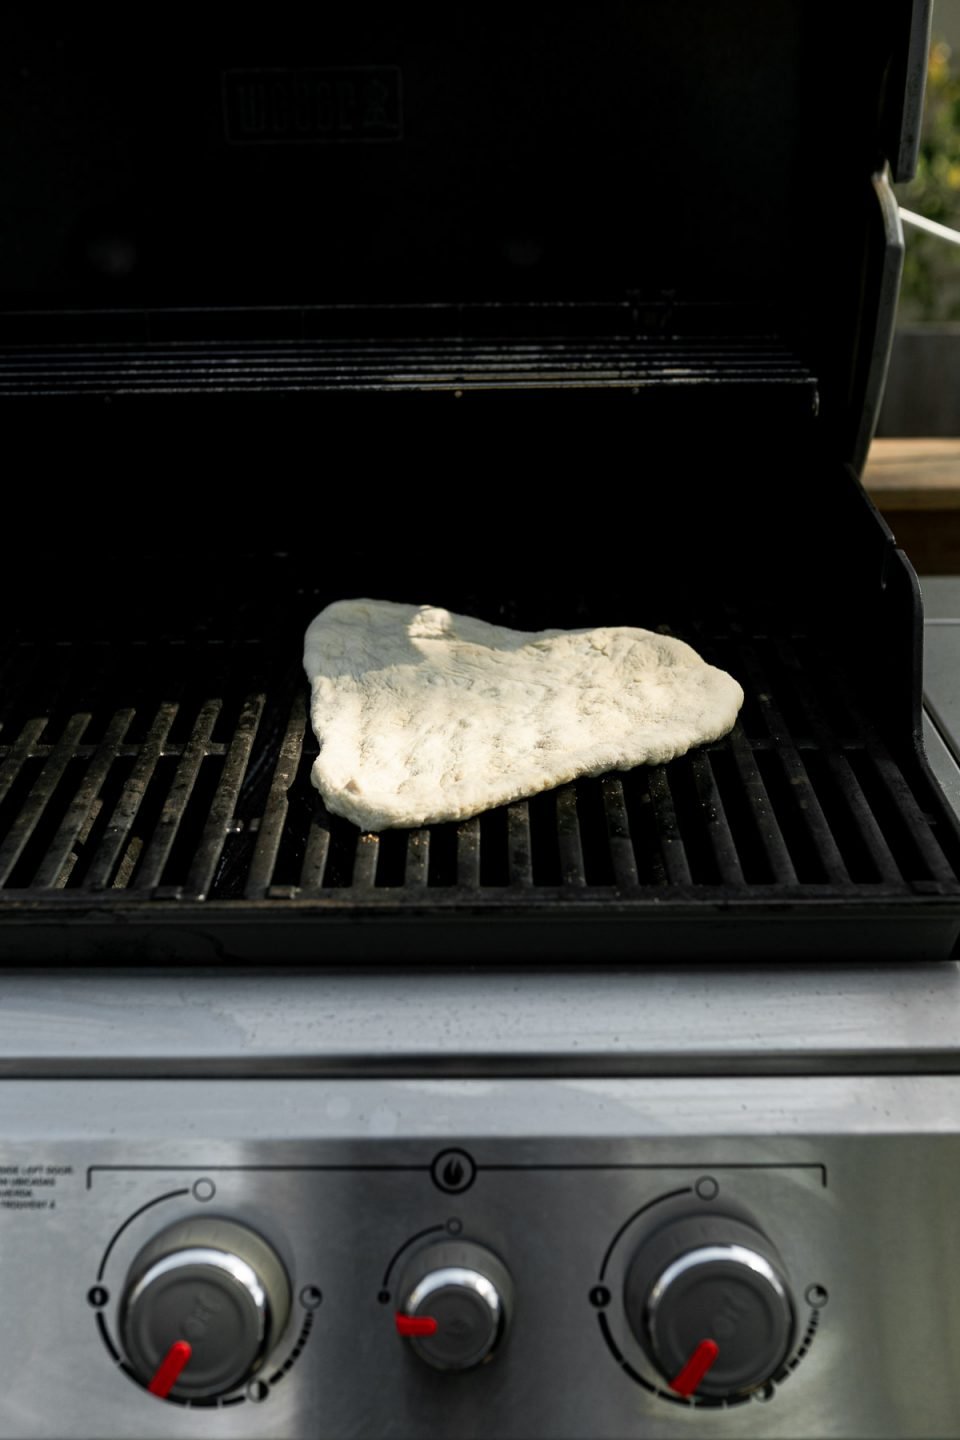 How to grill pizza, Step 4: Par grilled pizza crust on grill grates over direct heat.